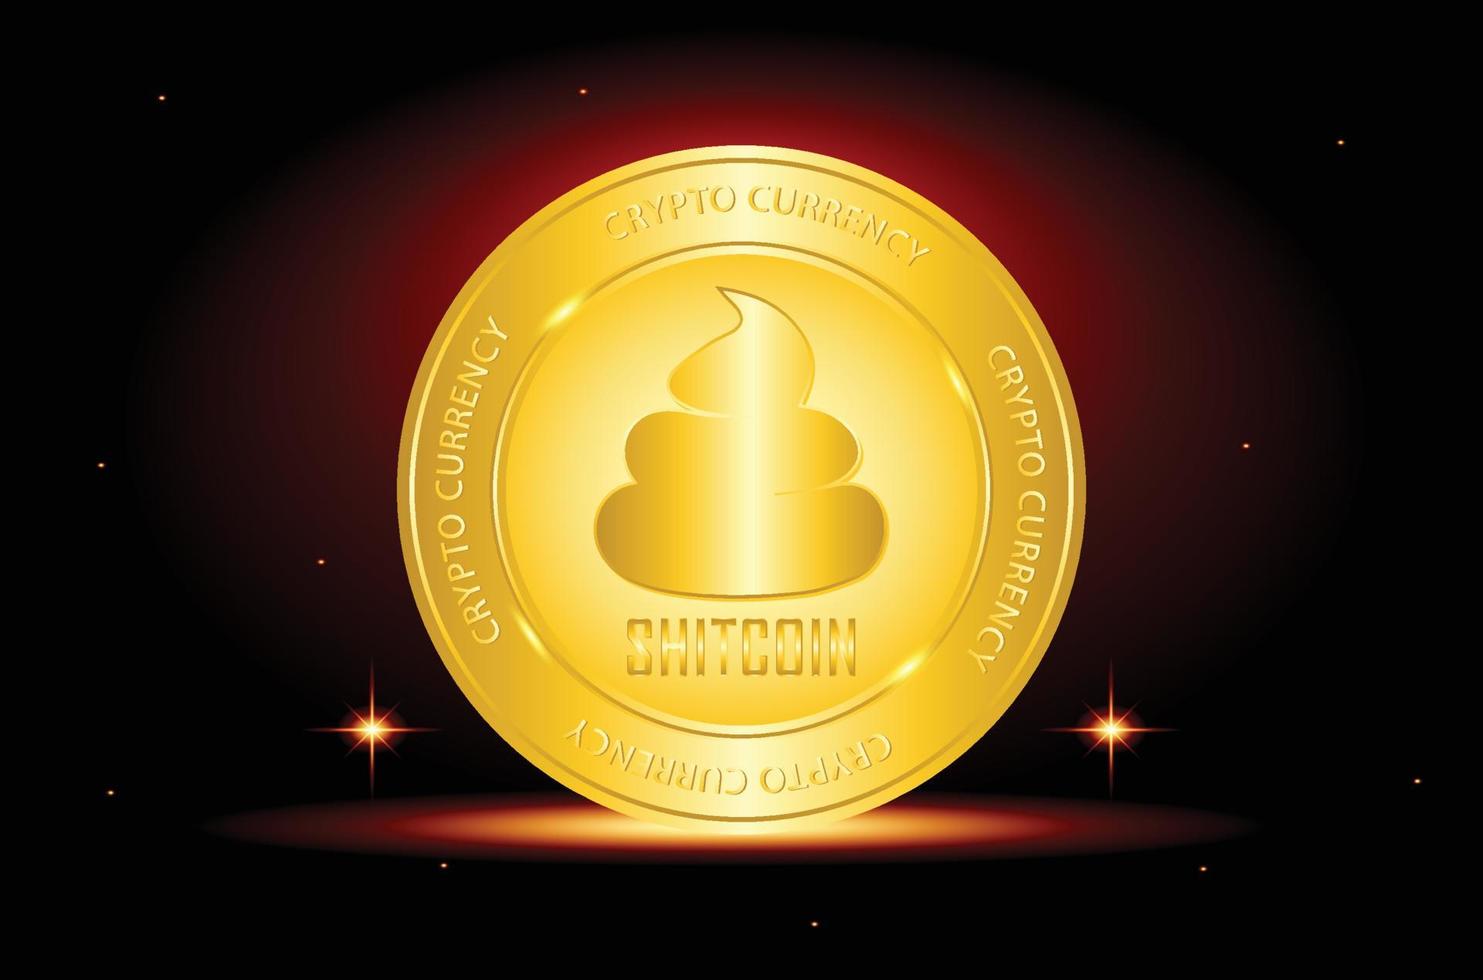 Shitcoin crypto currency with golden colour and dark background vector